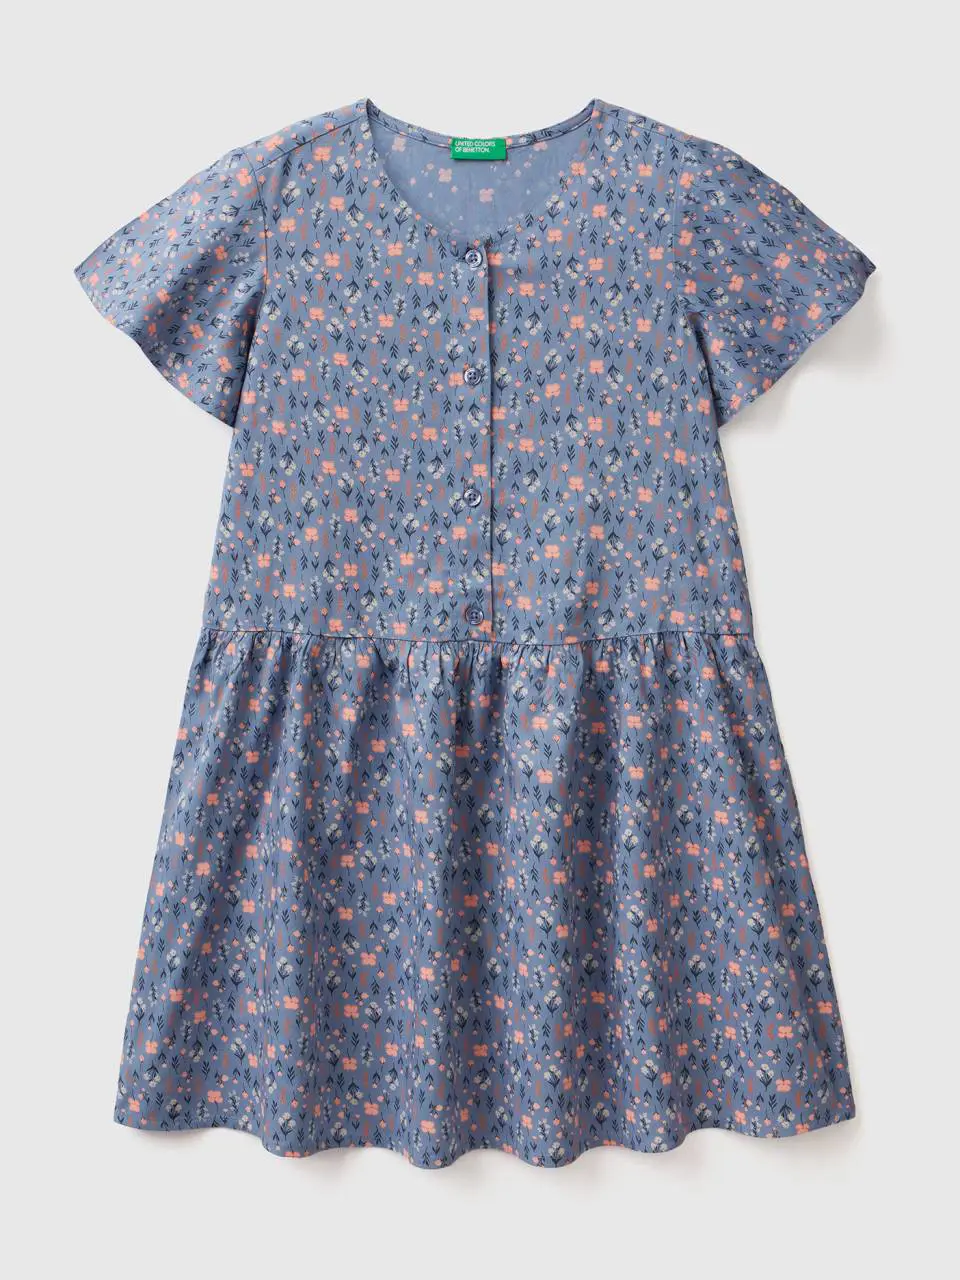 Benetton floral dress in sustainable viscose. 1